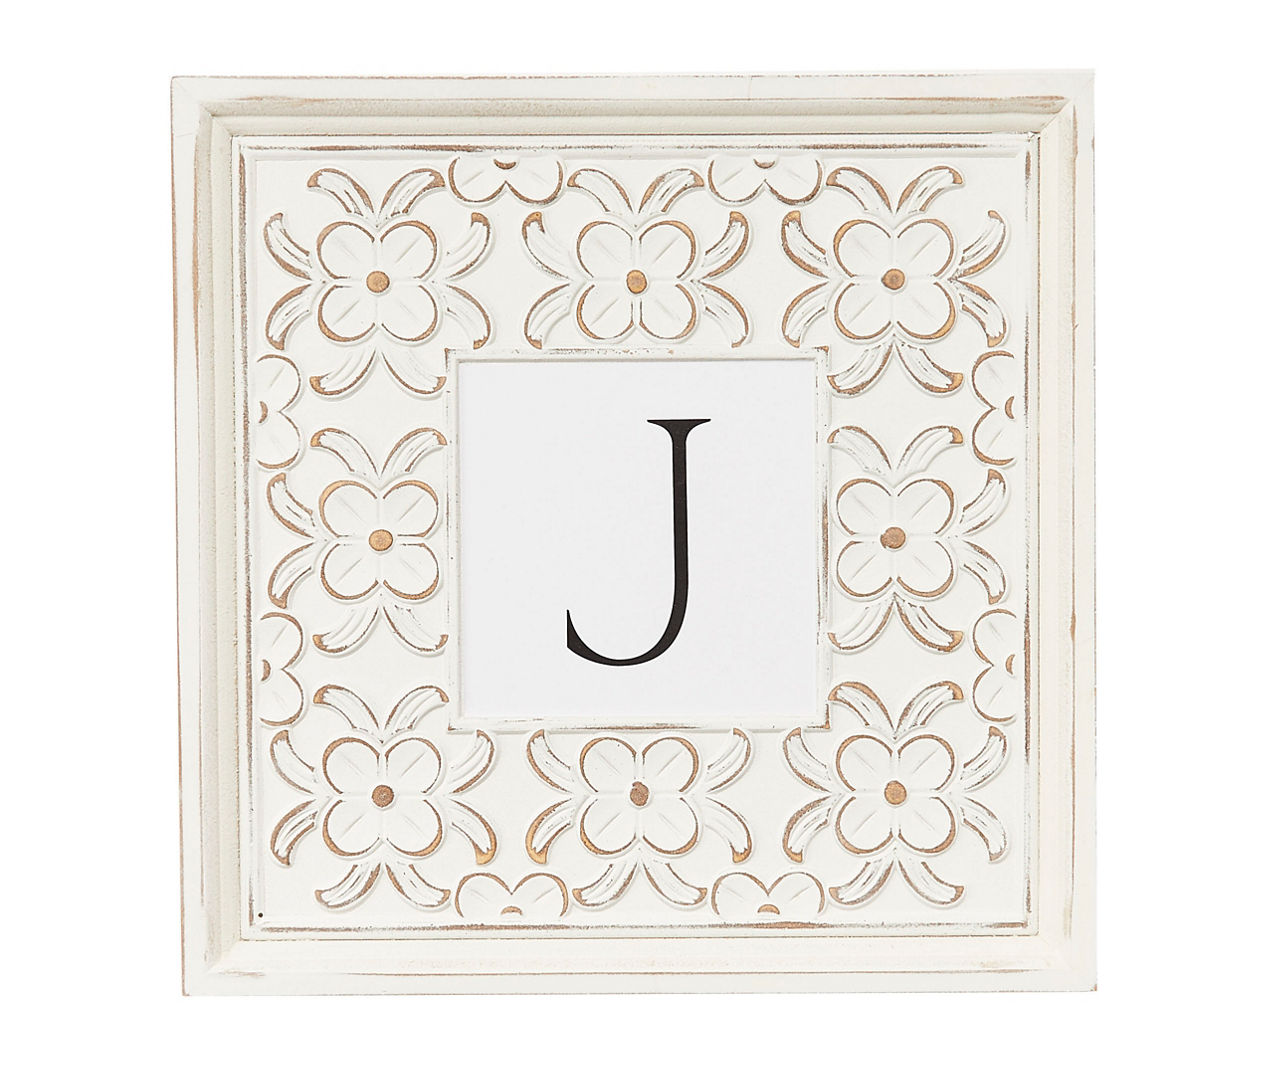 "J" White Distressed Carved Floral Monogram Square Wall Plaque